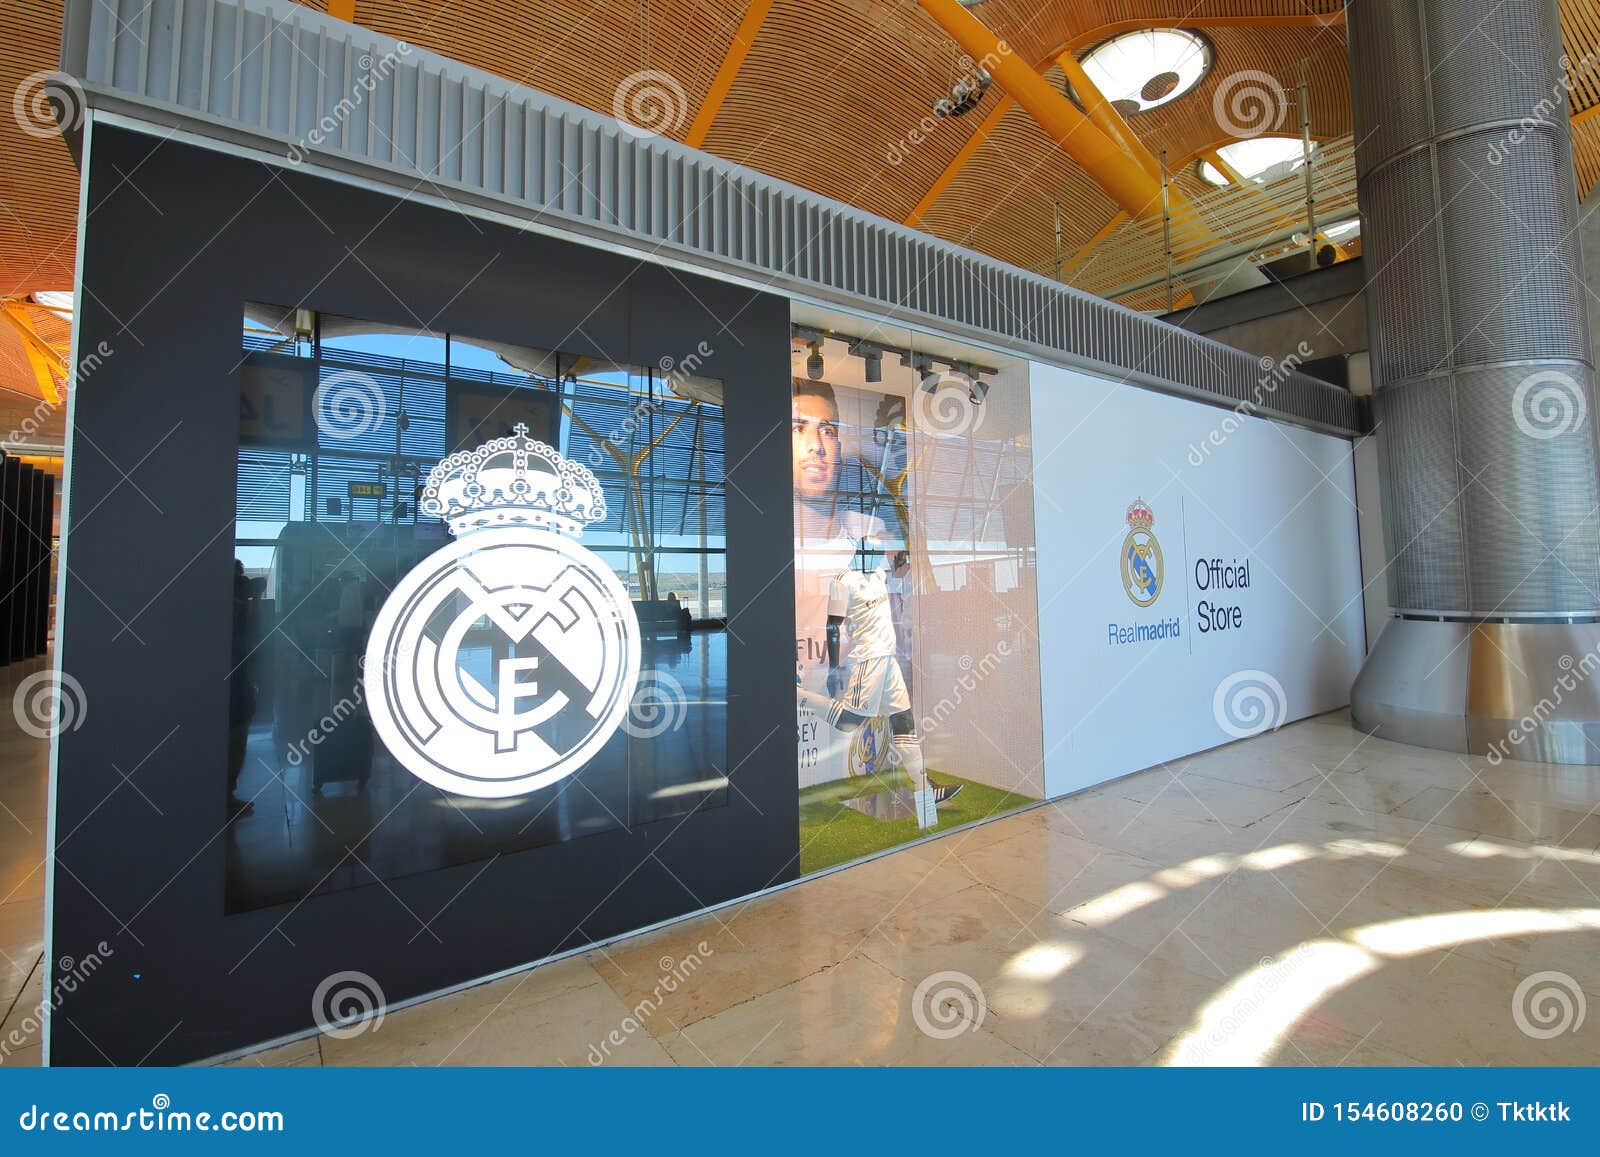 Real Madrid Football Team Official Store Madrid Airport Spain Editorial